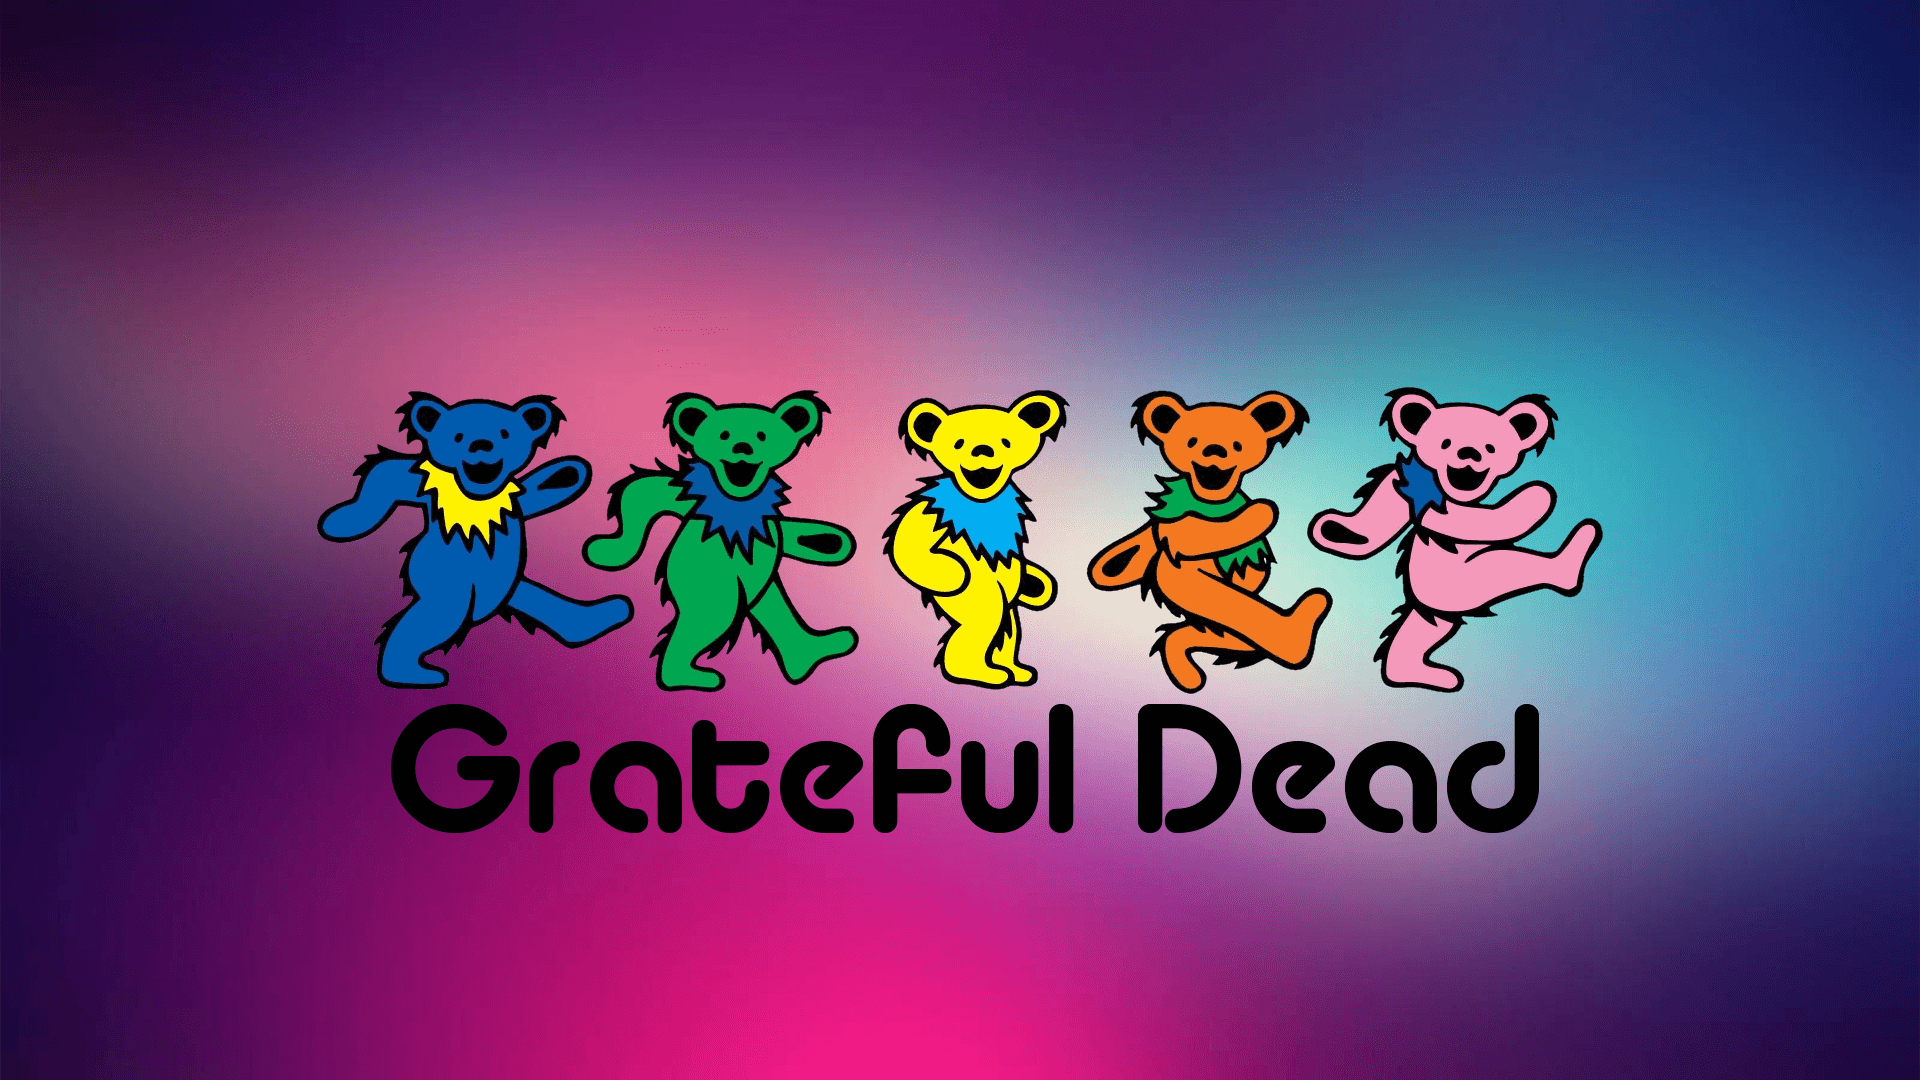 Bears  Dancing With The Stars Edition image sized for computer display  background  rgratefuldead